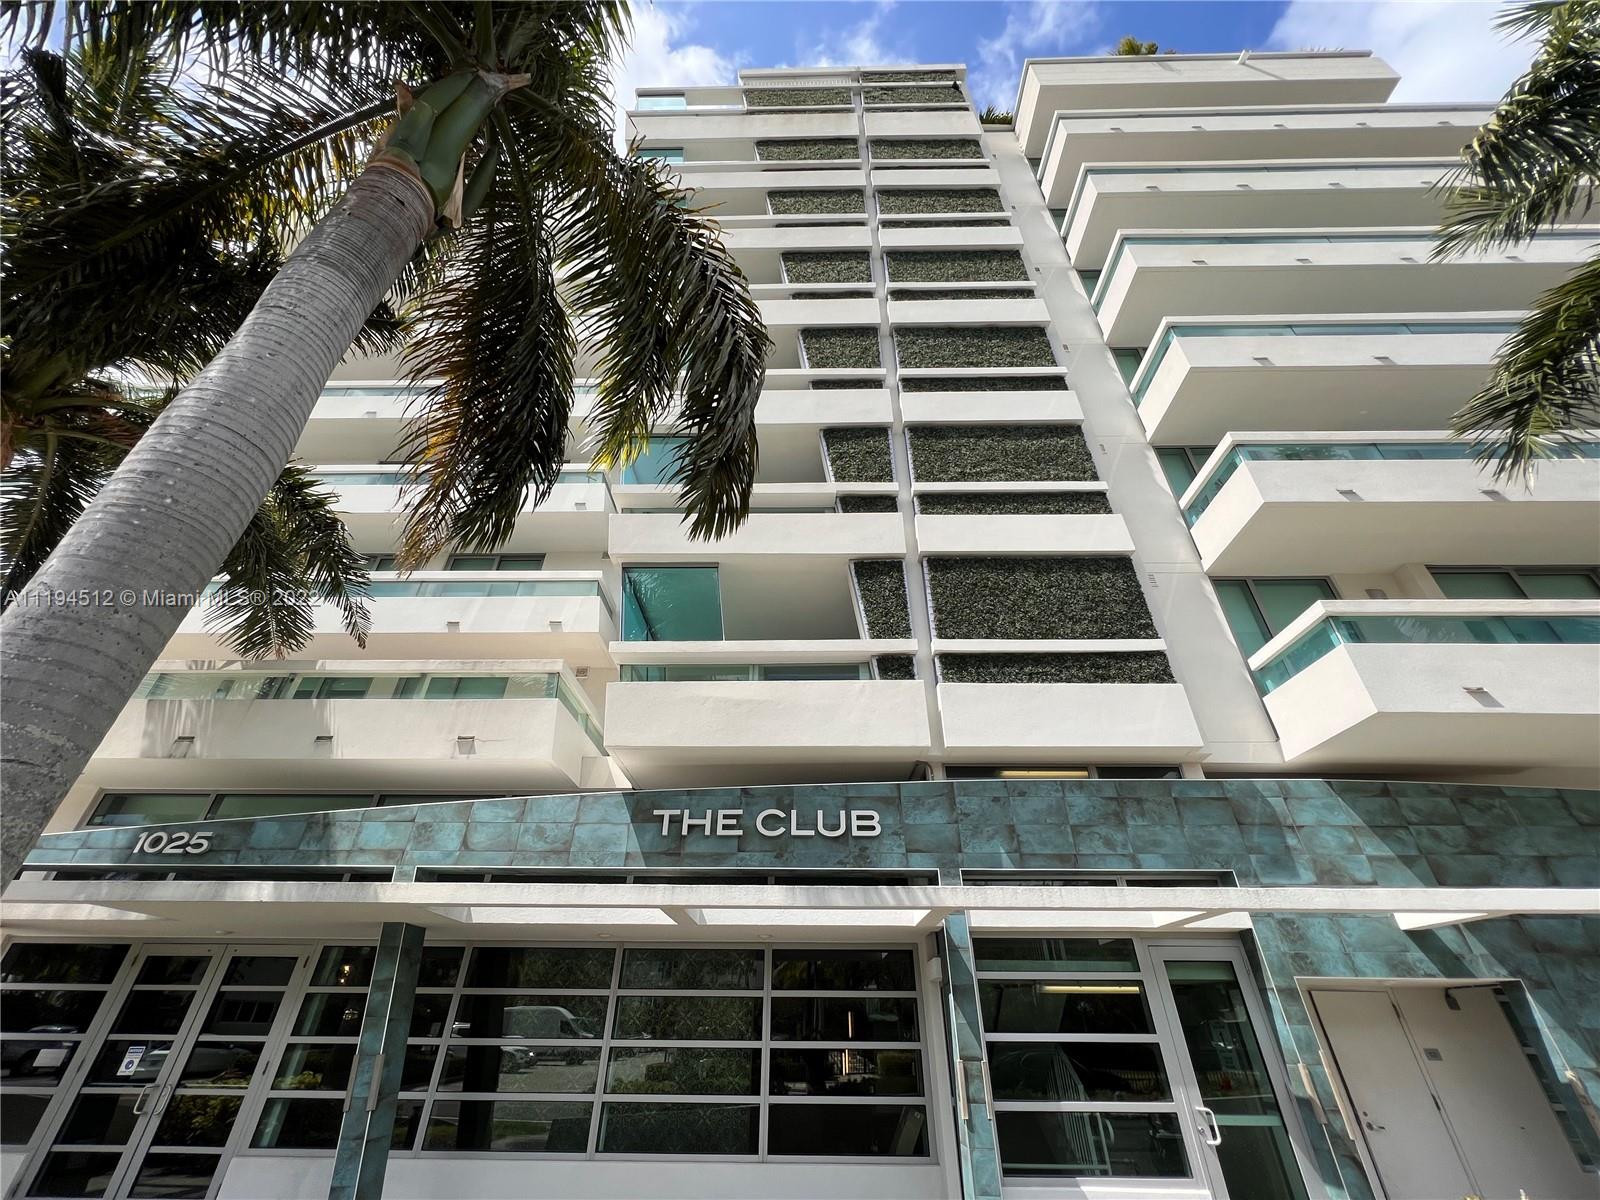 Beautiful 2/2 in the amazing Bay Harbors Islands with nice vies of the Bay and golf course. Like new unit with gorgeous upper level pool, overlooking all of Miami, gym and modern lobby. Look no further! Leased through October 2022.